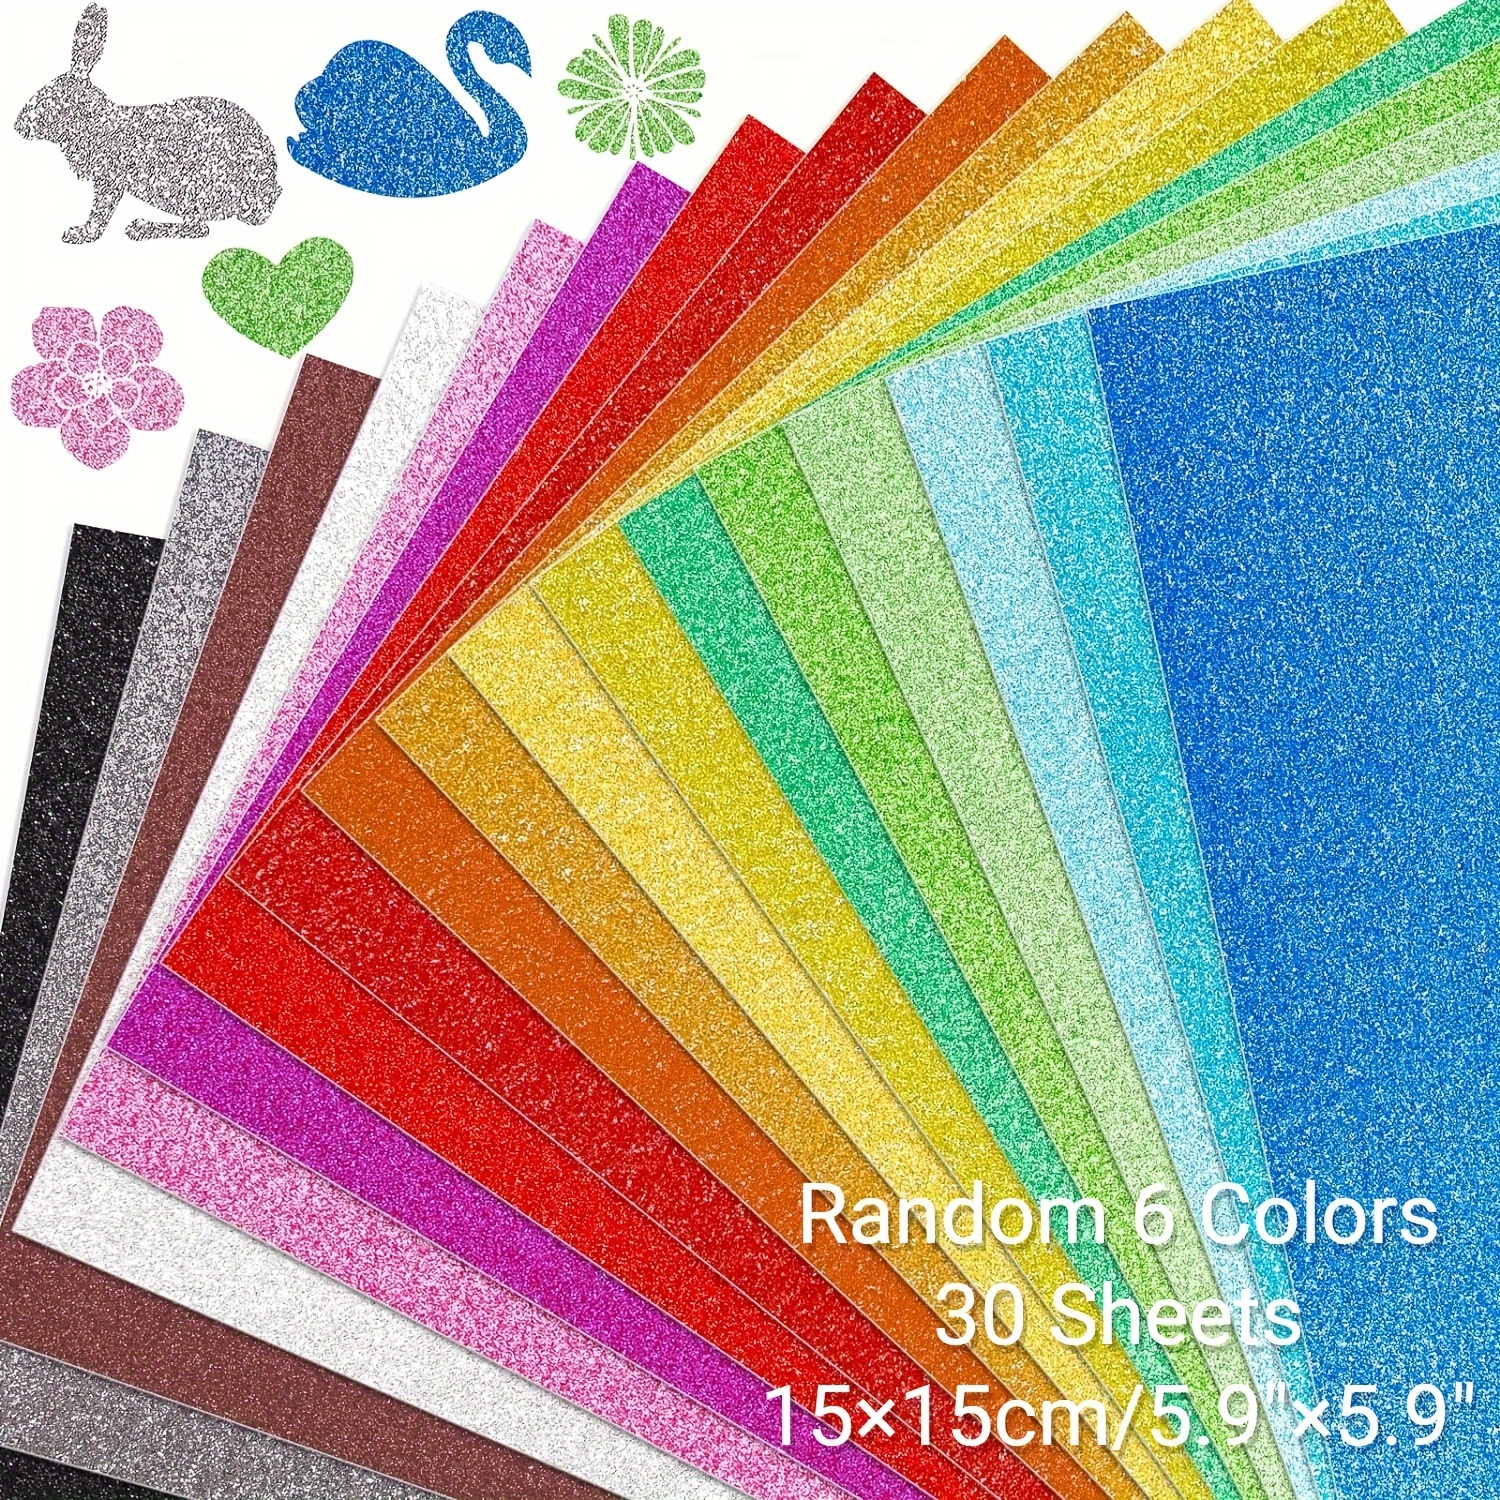 

30 Sheets Square Colorful Glitter Cardstock Paper, Random 6 Colors 15cm×15cm/5.9"×5.9" Premium Sparkly Paper For Scrapbook, Diy Projects, Party Decoration, Gift Box Wrapping 250gsm/92lb